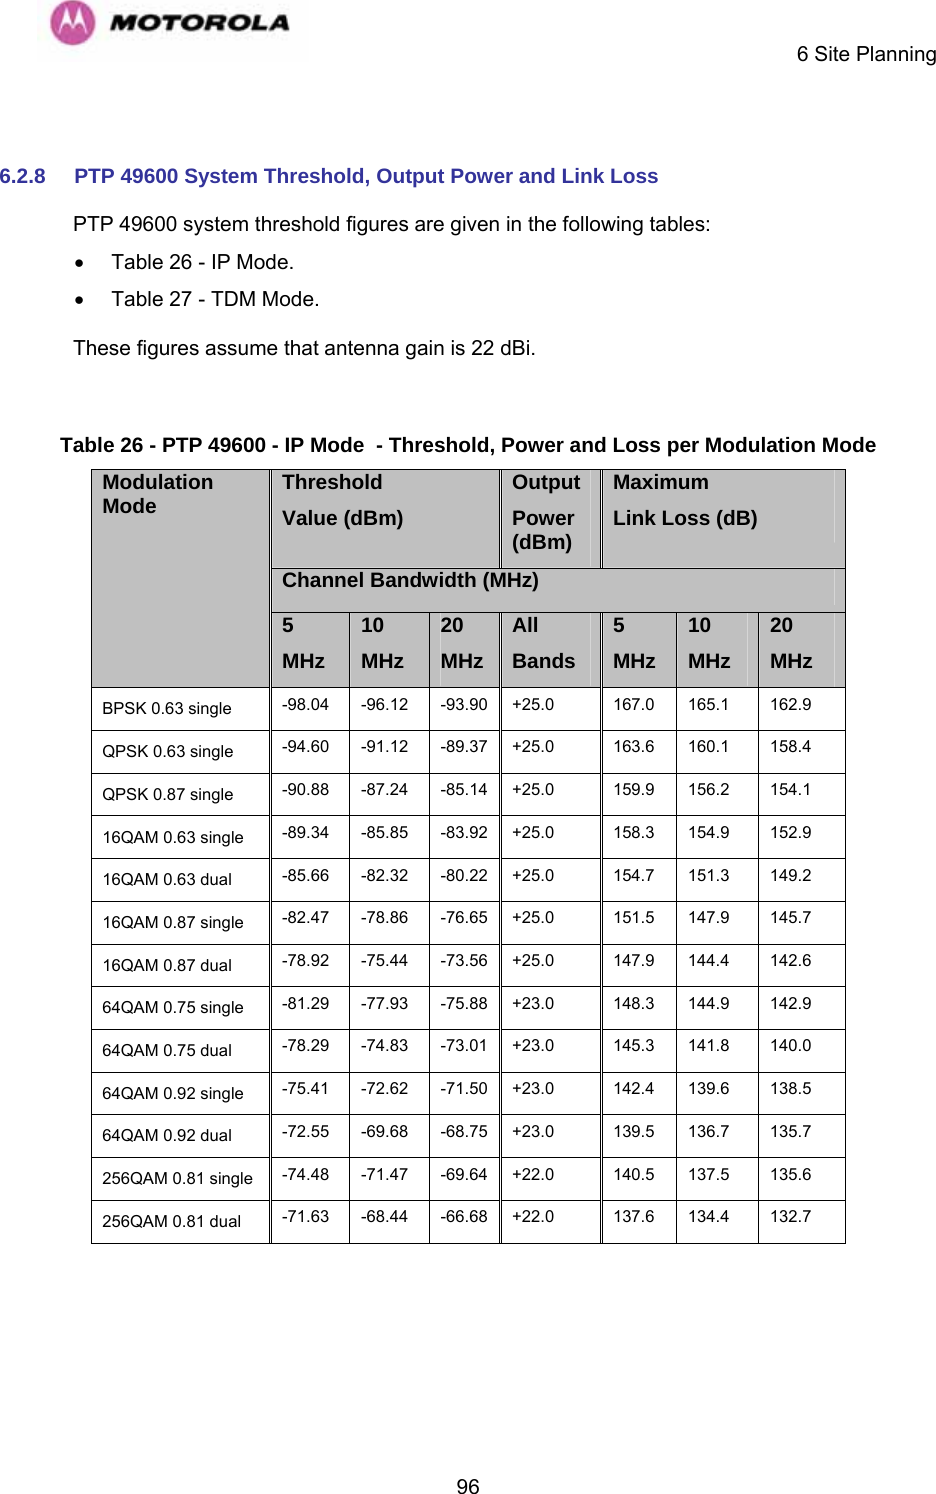     6 Site Planning  96 6.2.8  PTP 49600 System Threshold, Output Power and Link Loss PTP 49600 system threshold figures are given in the following tables: • Table 26 - IP Mode. • Table 27 - TDM Mode. These figures assume that antenna gain is 22 dBi.  Table 26 - PTP 49600 - IP Mode  - Threshold, Power and Loss per Modulation Mode Threshold Value (dBm) Output Power (dBm) Maximum Link Loss (dB) Channel Bandwidth (MHz) Modulation Mode 5 MHz 10 MHz 20 MHz All  Bands 5 MHz 10 MHz 20 MHz BPSK 0.63 single  -98.04 -96.12 -93.90 +25.0  167.0 165.1  162.9 QPSK 0.63 single  -94.60 -91.12 -89.37 +25.0  163.6 160.1  158.4 QPSK 0.87 single  -90.88 -87.24 -85.14 +25.0  159.9 156.2  154.1 16QAM 0.63 single  -89.34 -85.85 -83.92 +25.0  158.3 154.9  152.9 16QAM 0.63 dual  -85.66 -82.32 -80.22 +25.0  154.7 151.3  149.2 16QAM 0.87 single  -82.47 -78.86 -76.65 +25.0  151.5 147.9  145.7 16QAM 0.87 dual  -78.92 -75.44 -73.56 +25.0  147.9 144.4  142.6 64QAM 0.75 single  -81.29 -77.93 -75.88 +23.0  148.3 144.9  142.9 64QAM 0.75 dual  -78.29 -74.83 -73.01 +23.0  145.3 141.8  140.0 64QAM 0.92 single  -75.41 -72.62 -71.50 +23.0  142.4 139.6  138.5 64QAM 0.92 dual  -72.55 -69.68 -68.75 +23.0  139.5 136.7  135.7 256QAM 0.81 single  -74.48 -71.47 -69.64 +22.0  140.5 137.5  135.6 256QAM 0.81 dual  -71.63 -68.44 -66.68 +22.0  137.6 134.4  132.7  